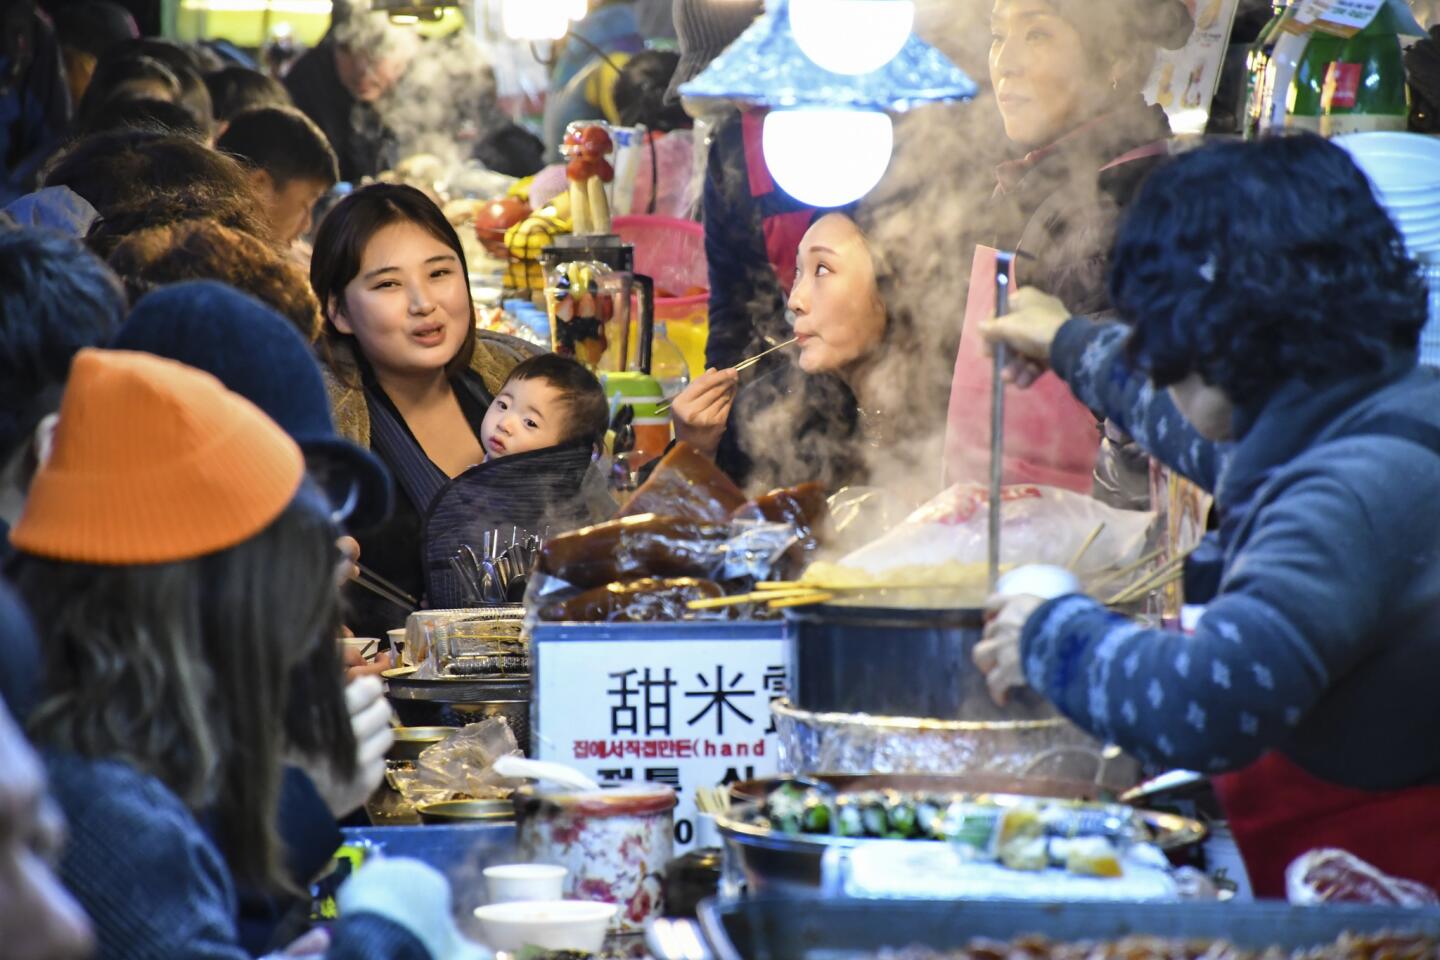 Gwangjang Market in Seoul is considered the biggest food market in the city, with more than 200 vendors. Those vendors are a particularly known for their mung bean pancakes.